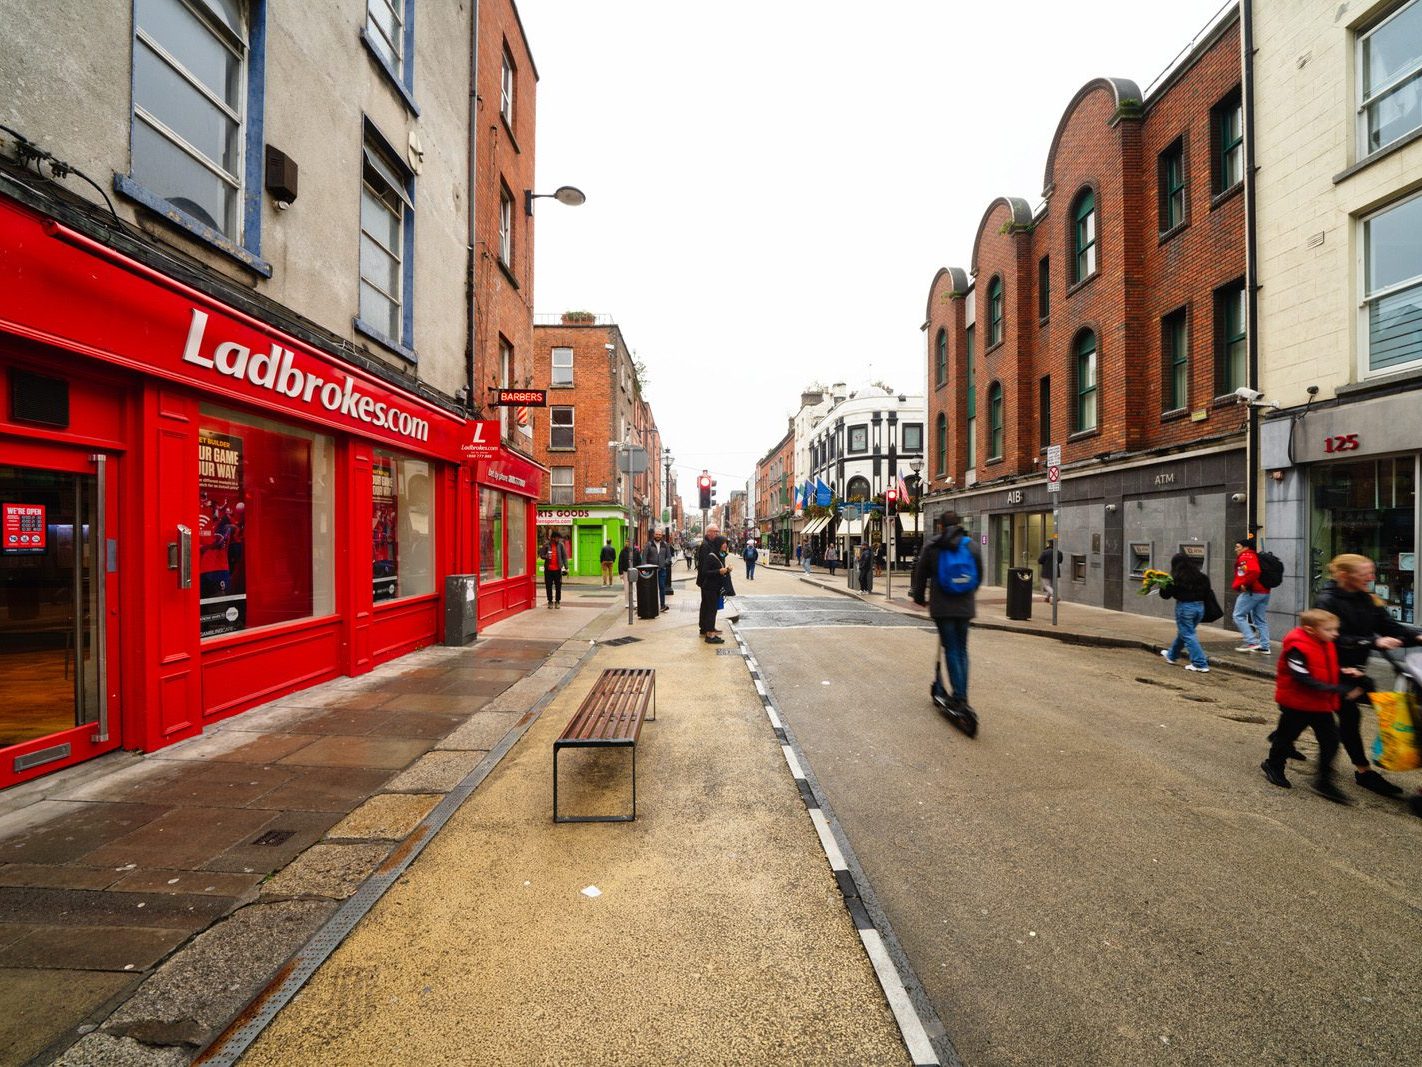 CAPEL STREET ON A DULL WET DAY [INTERIM CAPEL STREET IMPROVEMENT WORKS ARE NOW ONGOING] 015